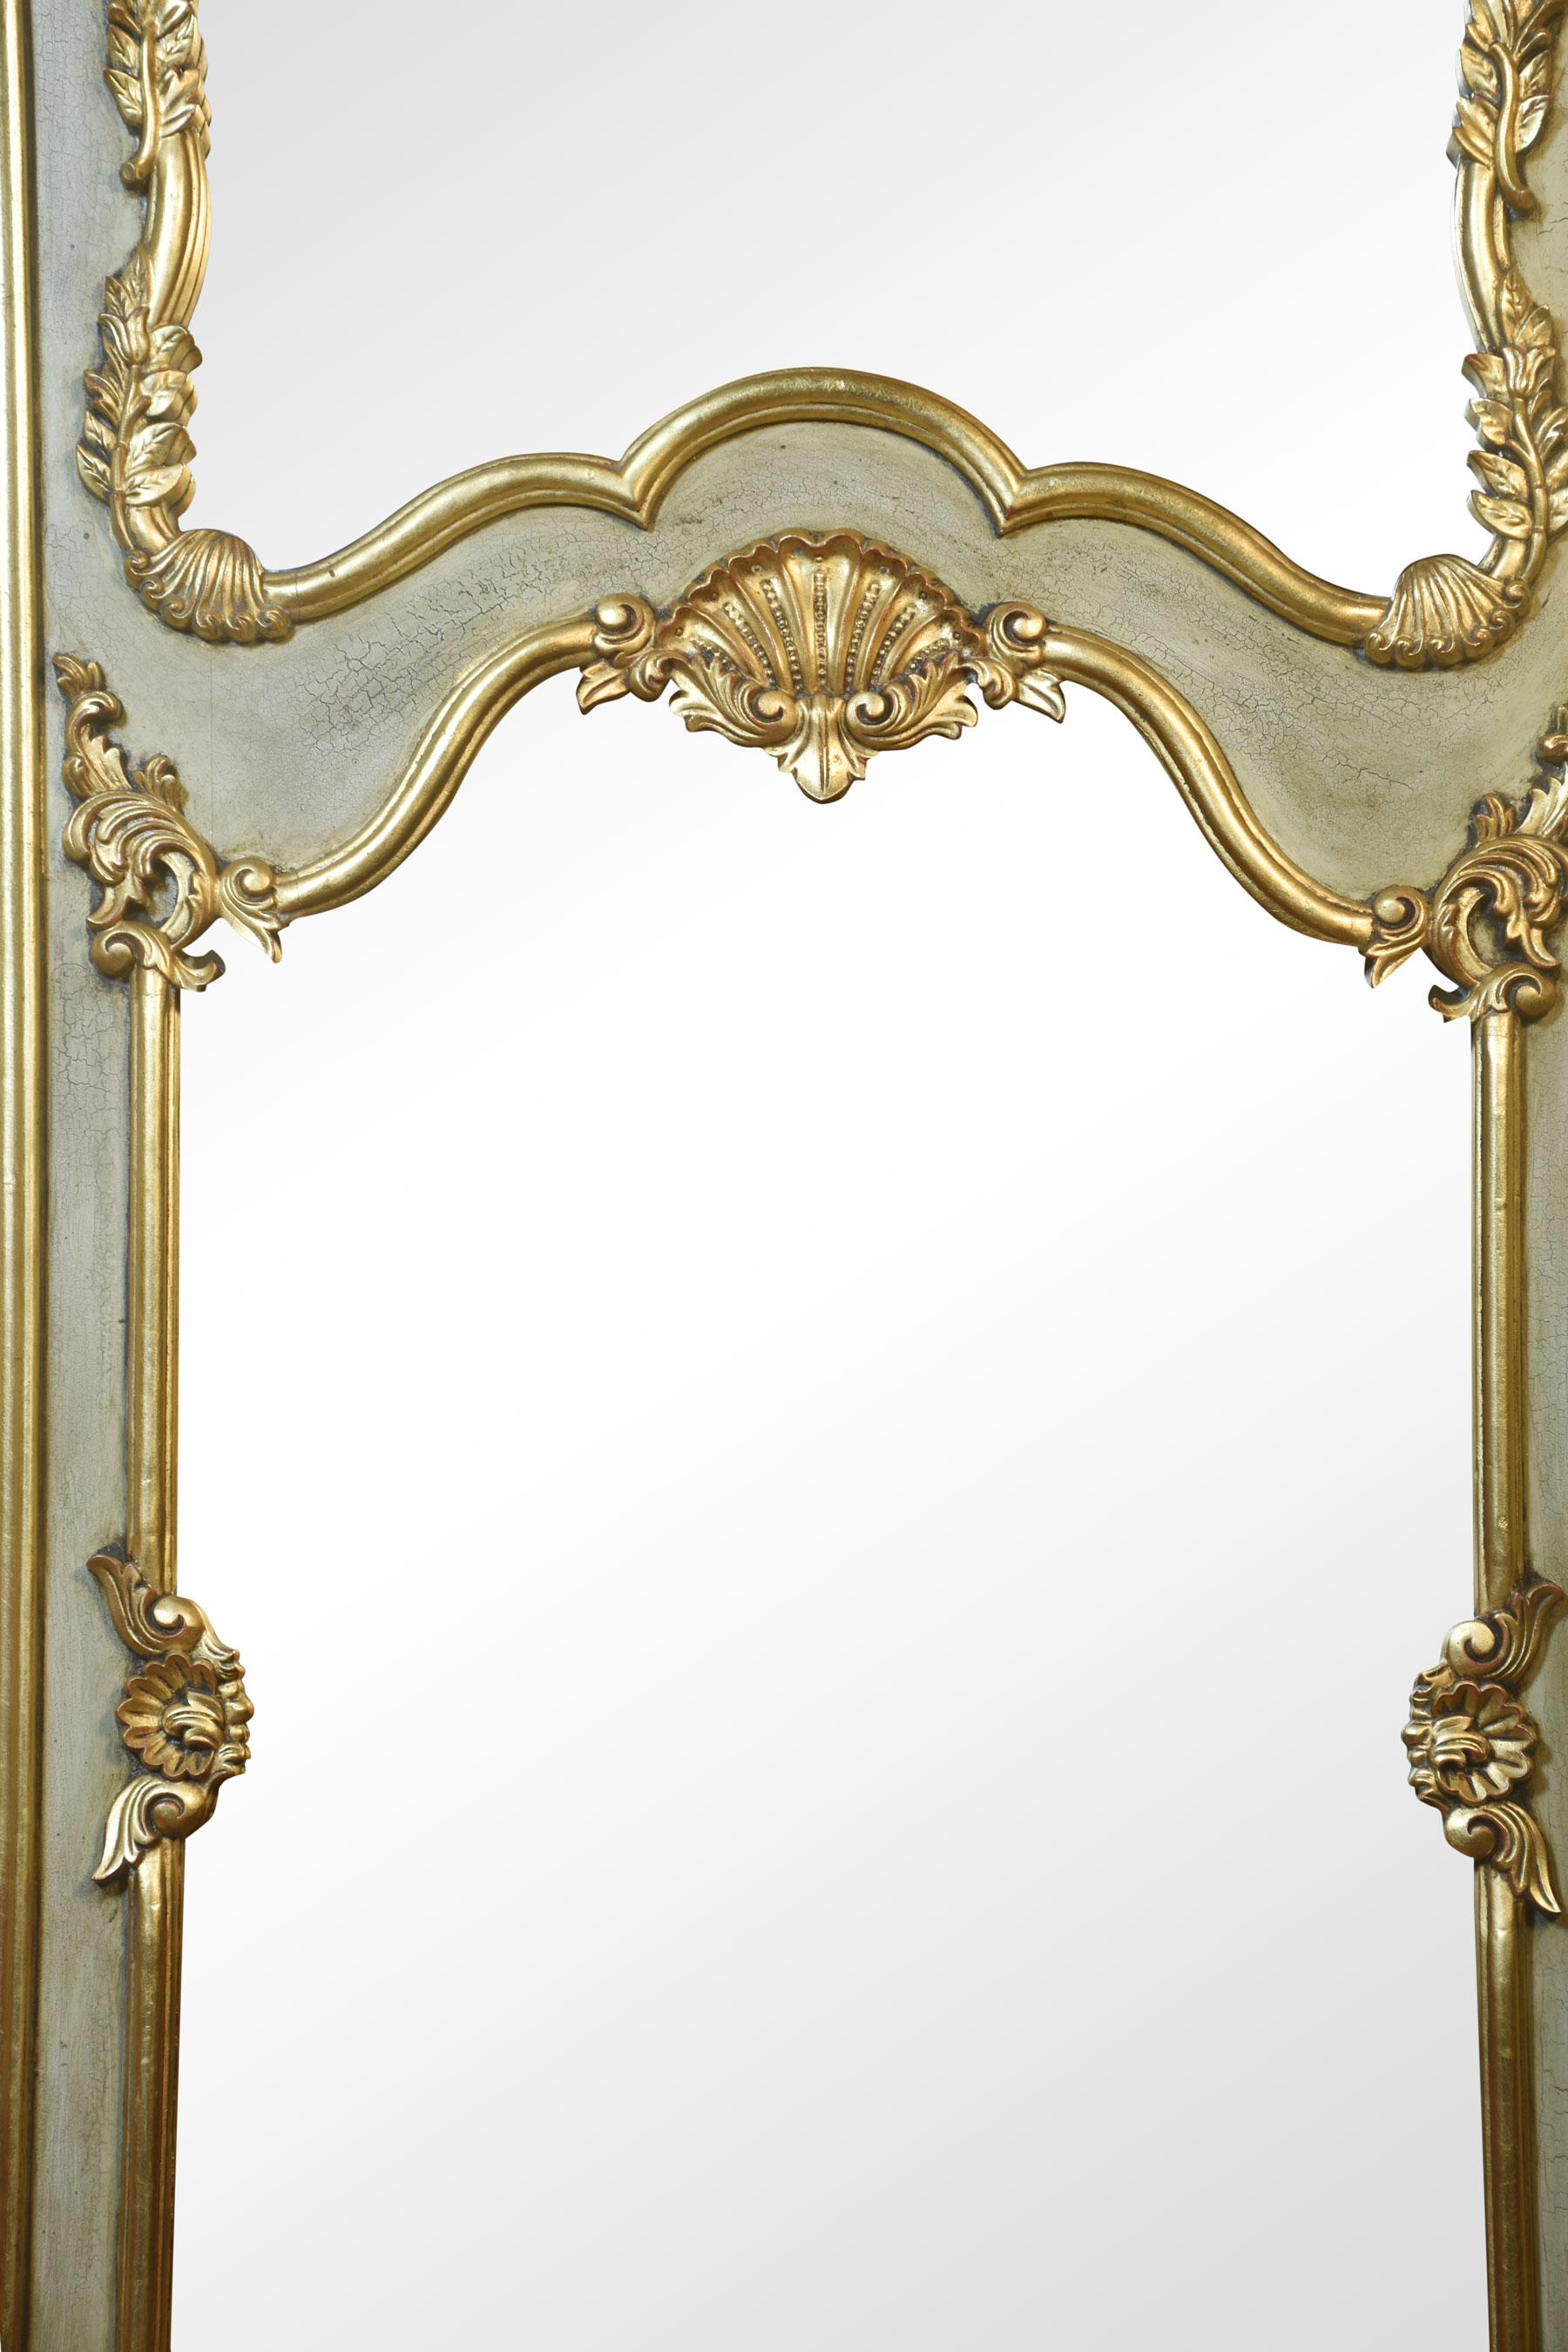 Pair of Louis XV style mirrors, of rectangular form, the moulded top above foliated decoration to the two original plate mirrors incased in giltwood highlighted borders with French green frames.
Dimensions
Height 74.5 Inches
Width 55.5